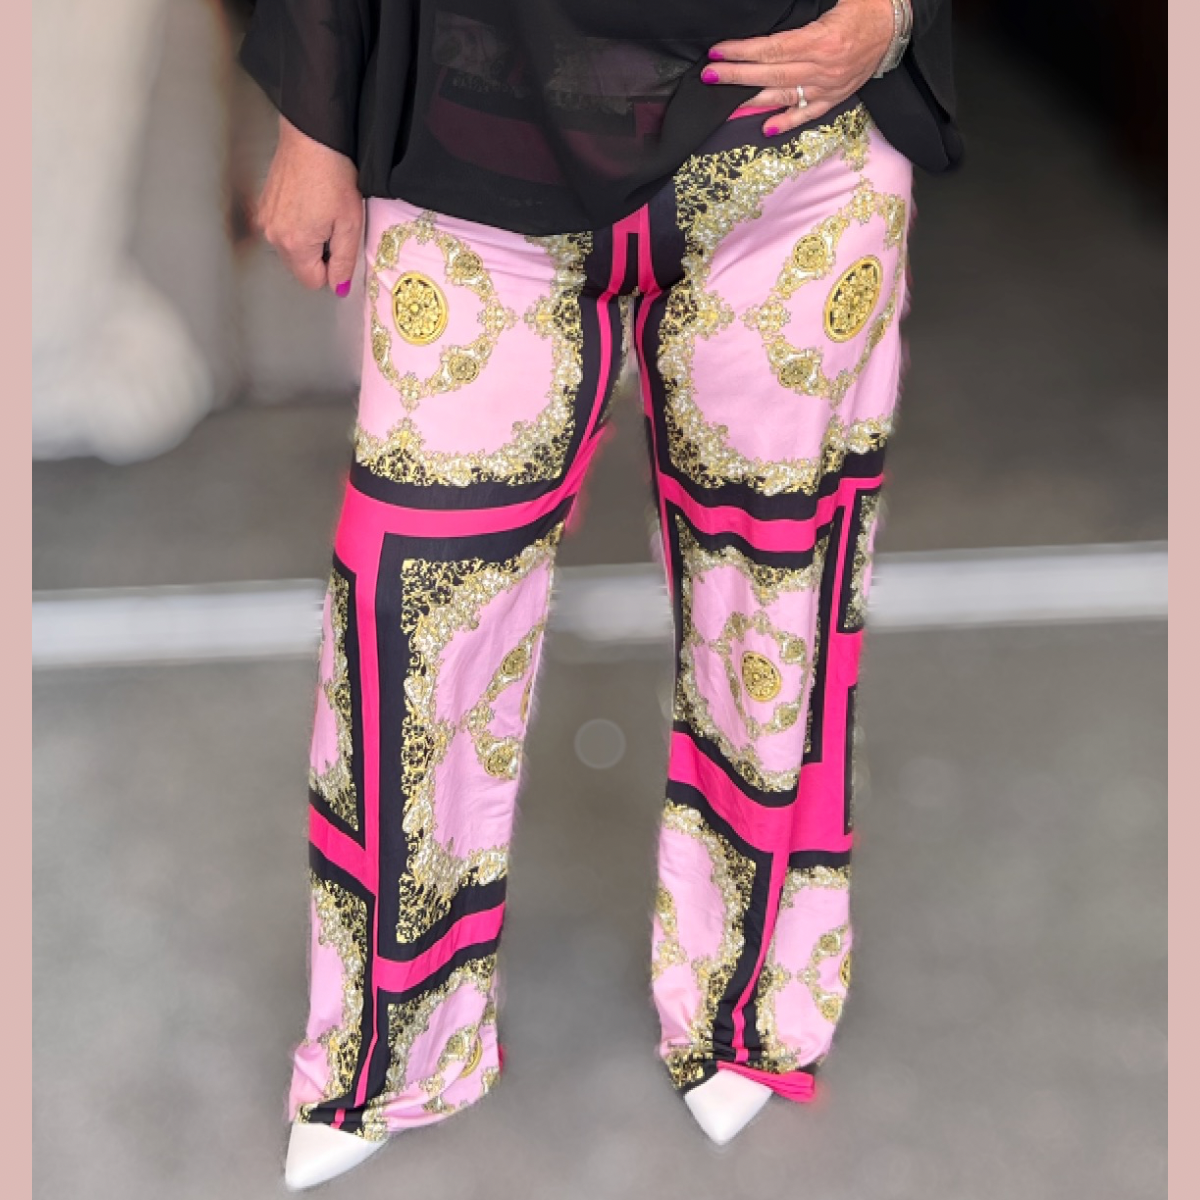 BRIGHT PINK GOLD TILE EFFECT ELASTIC WAIST PALAZZO PANTS